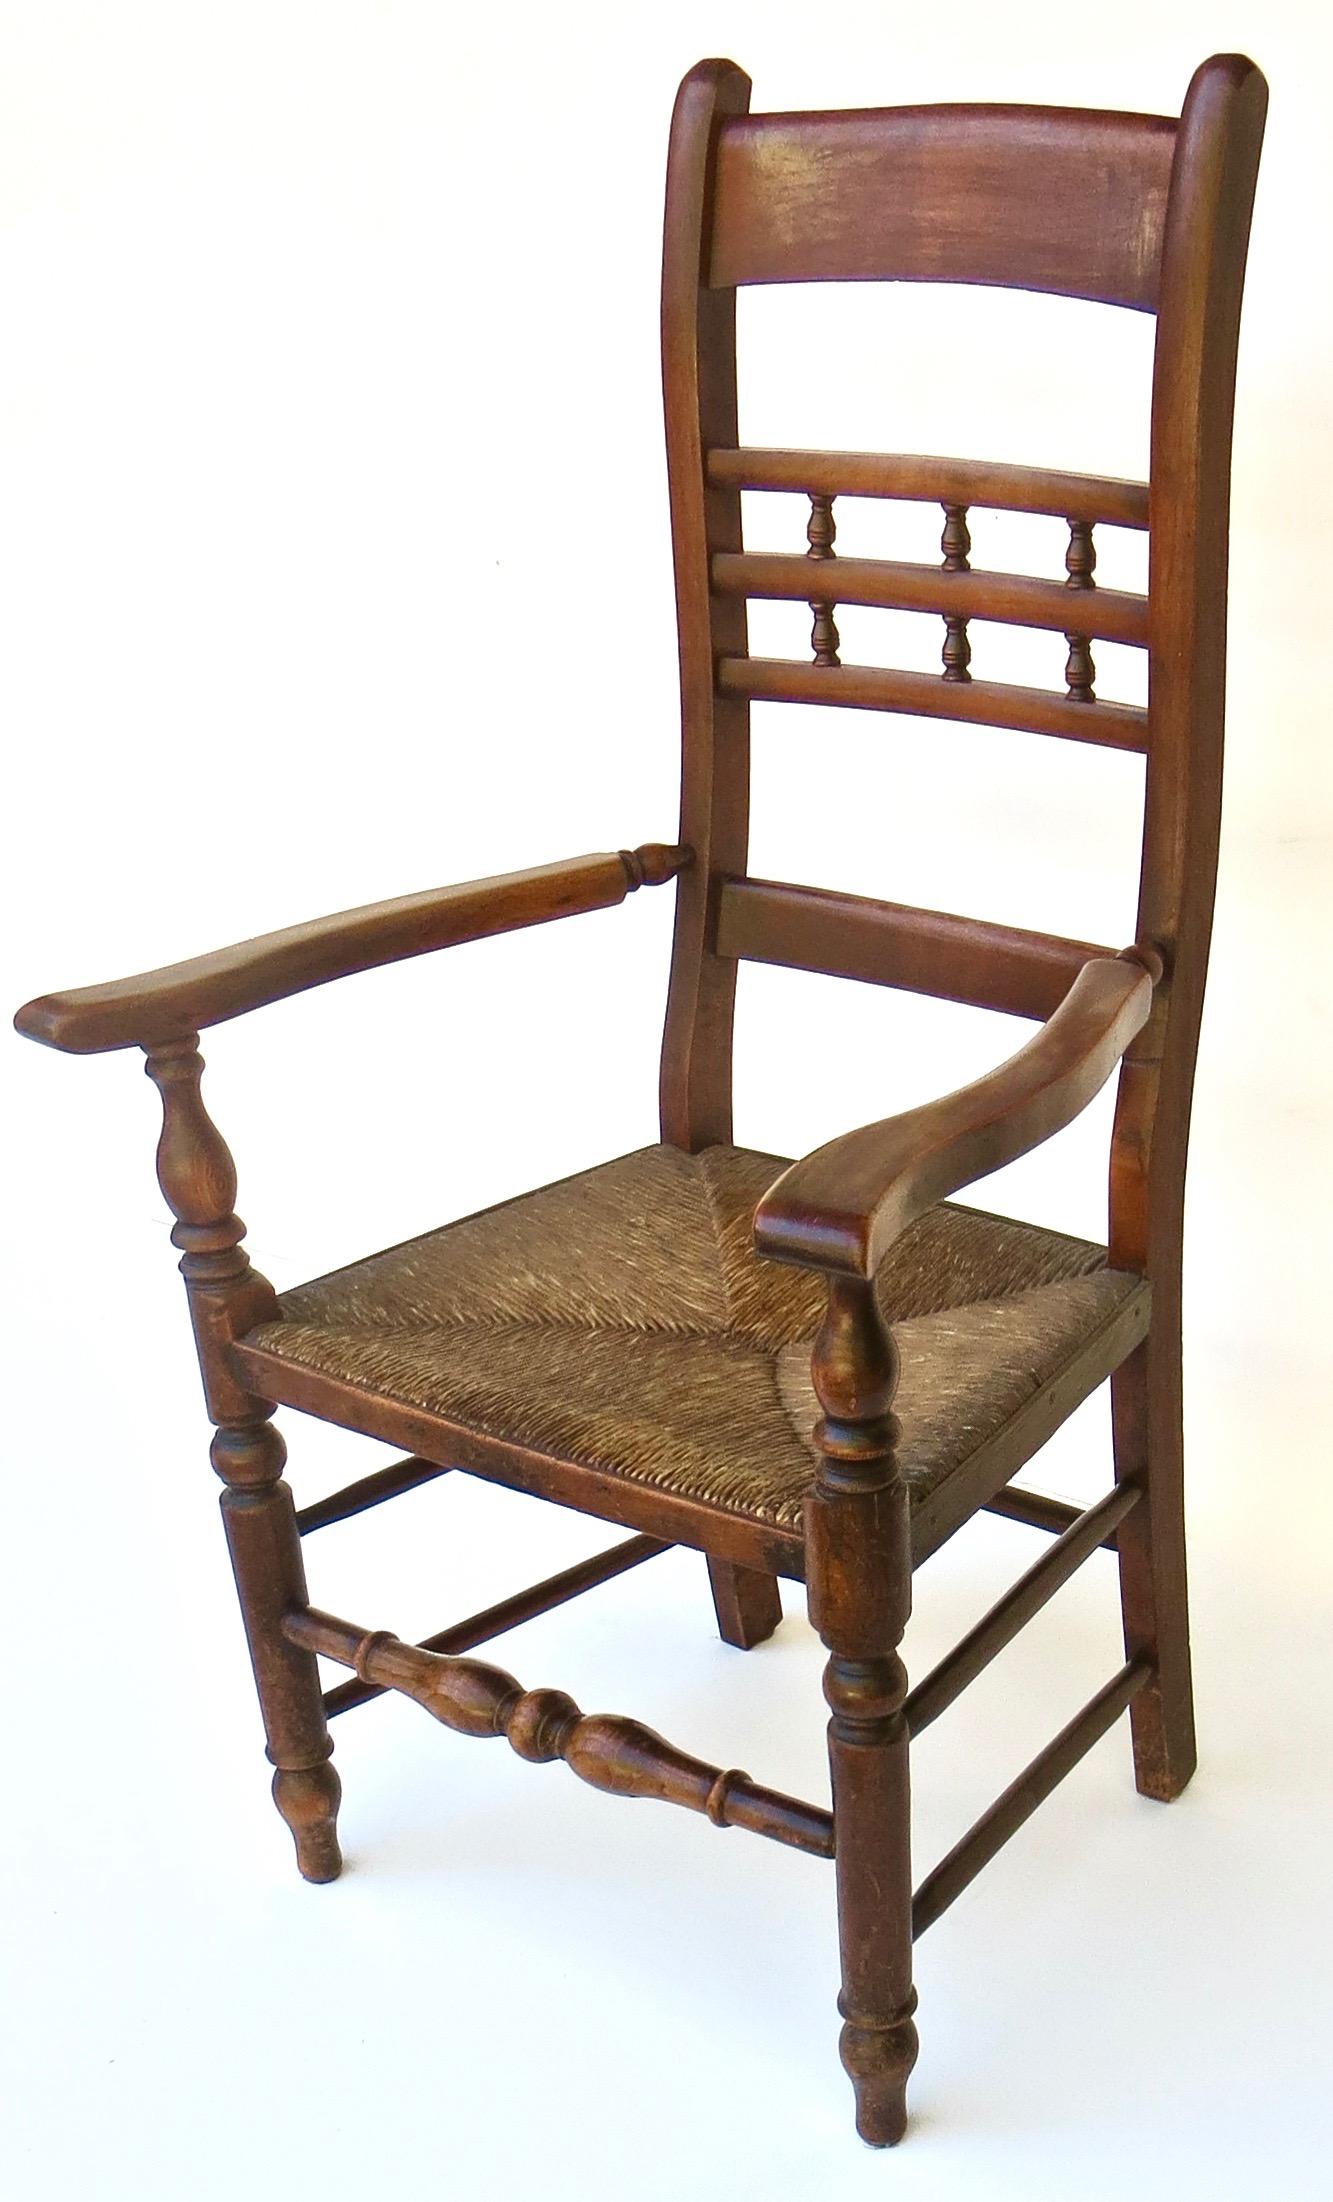 Very nicely appointed Victorian rush seated ladder back chair; English and mid 19th century. A little different with the fret back design, this chair is in completely all original condition and surface, with the original rush seat in sound and